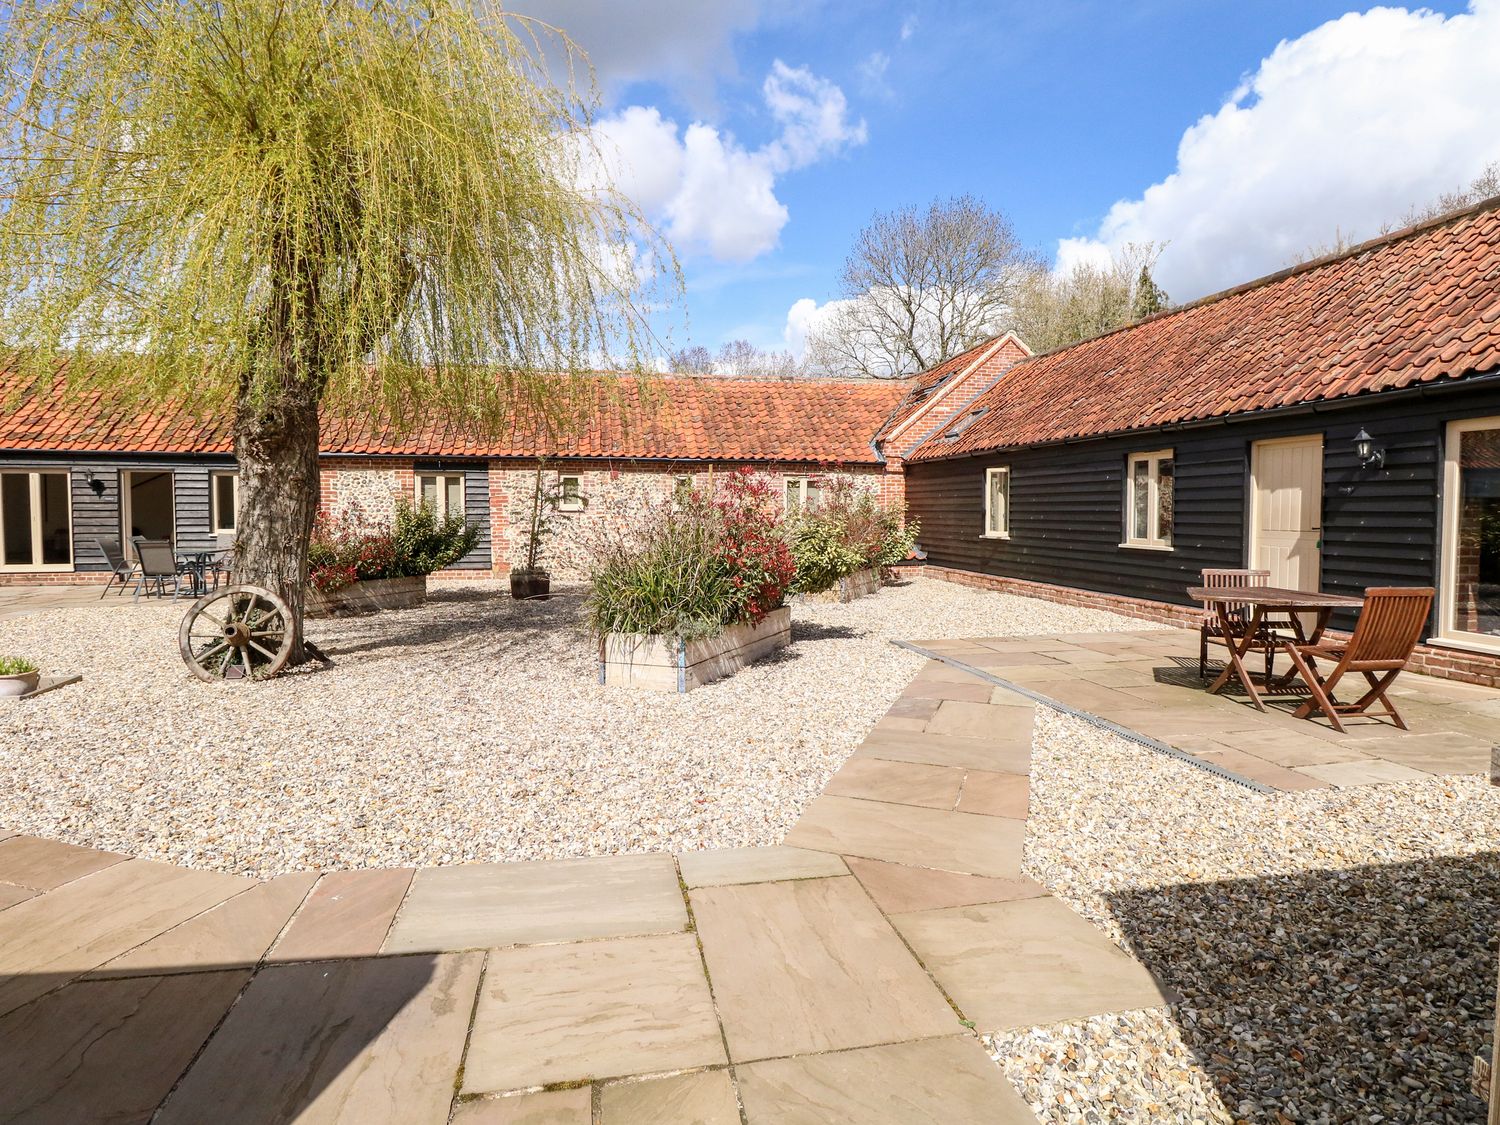 The Stables, Willow Grange Barns, Stanfield